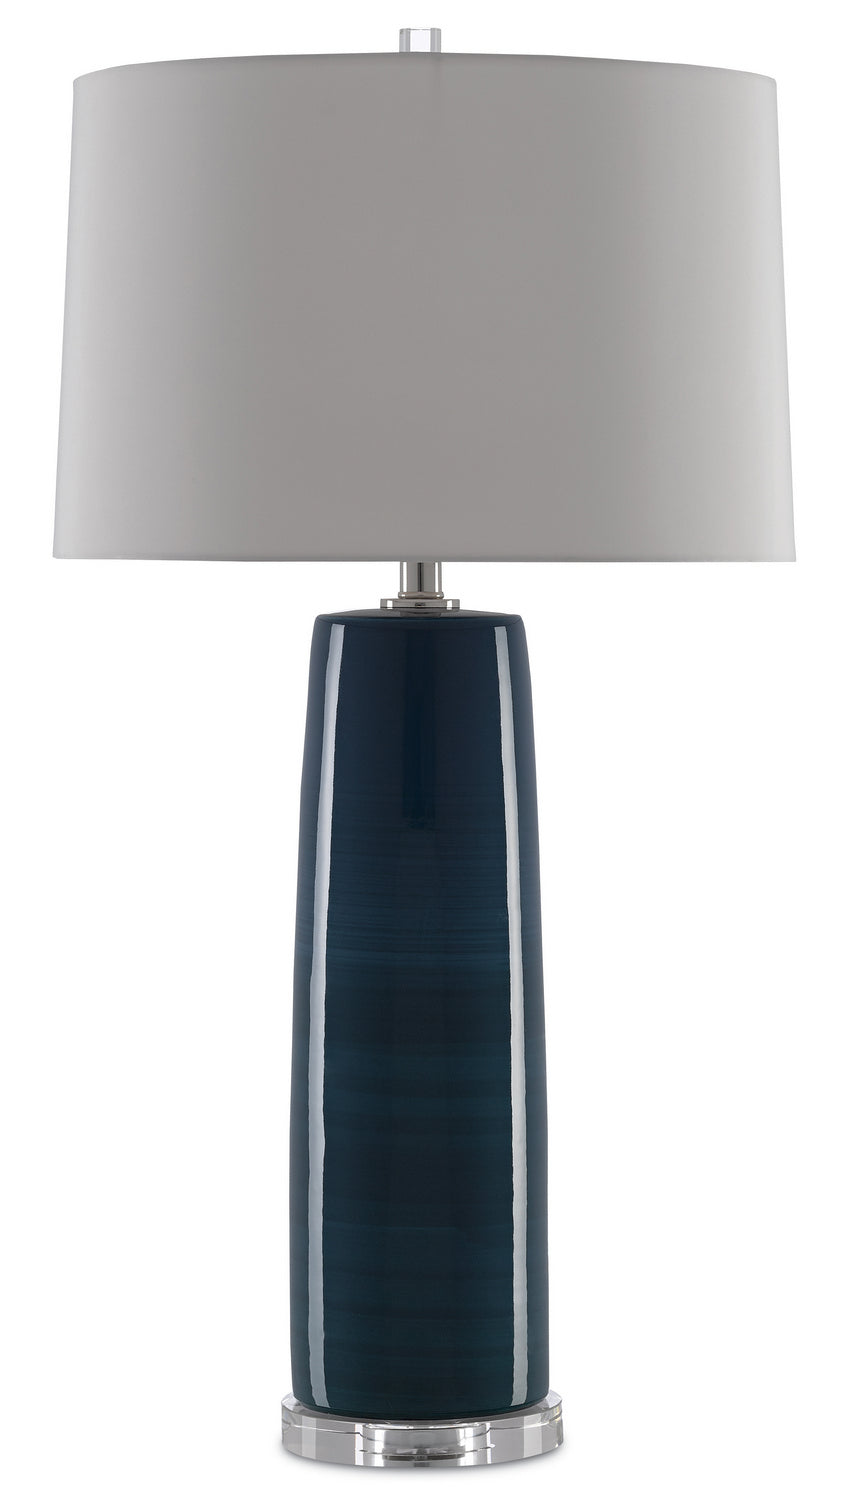 One Light Table Lamp from the Azure collection in Navy/Polished Nickel finish